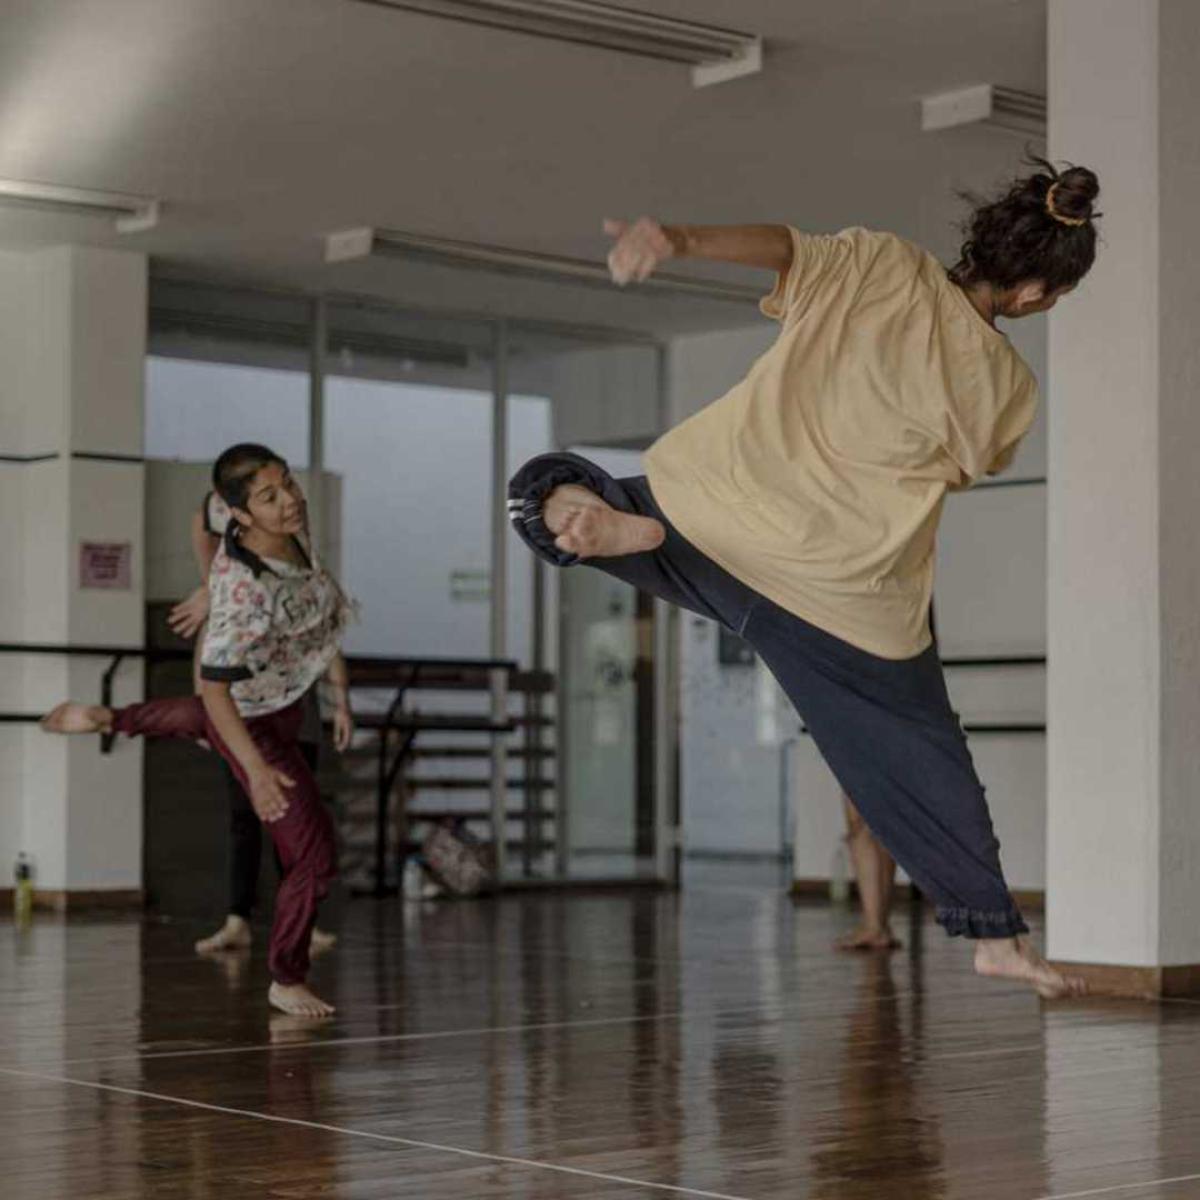 Two people dance in a studio, one jumping high, the other just landing.